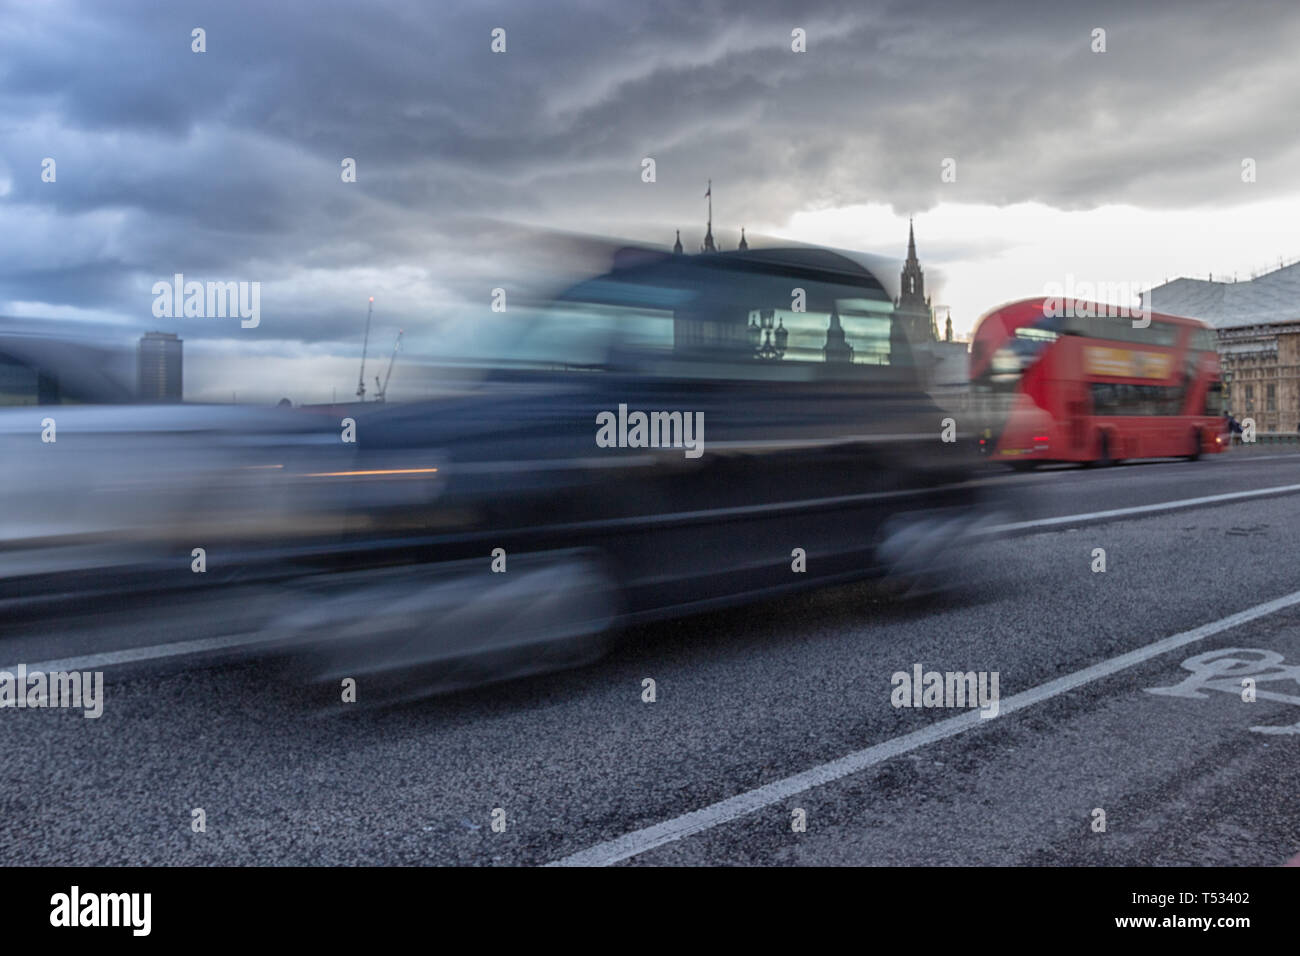 Westminster Bridge, London, England, April 4 2019. A motion blurred iconic London taxi and famous red London bus travelling across the bridge in from Stock Photo